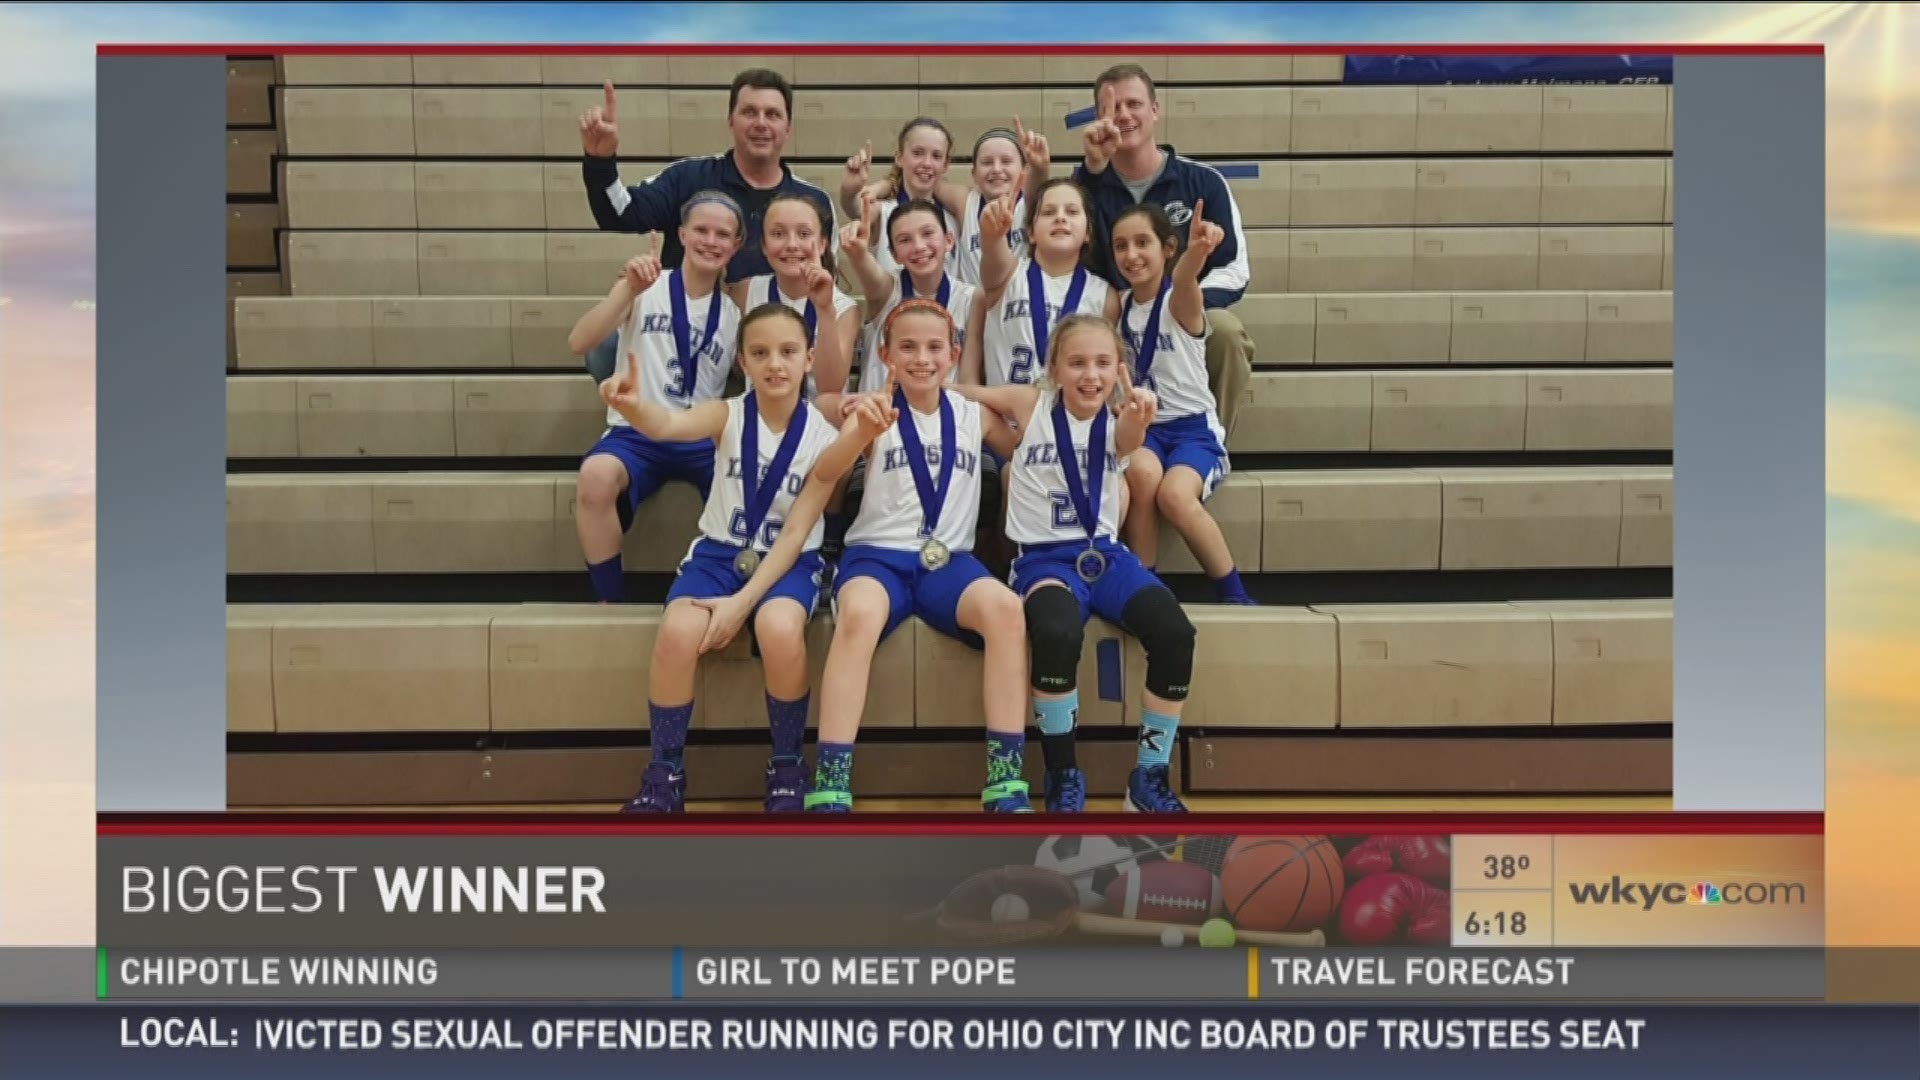 The "biggest winner" in local sports for March 25, 2016 is the Kenston 5th Grade Girl's Travel Basketball Team.